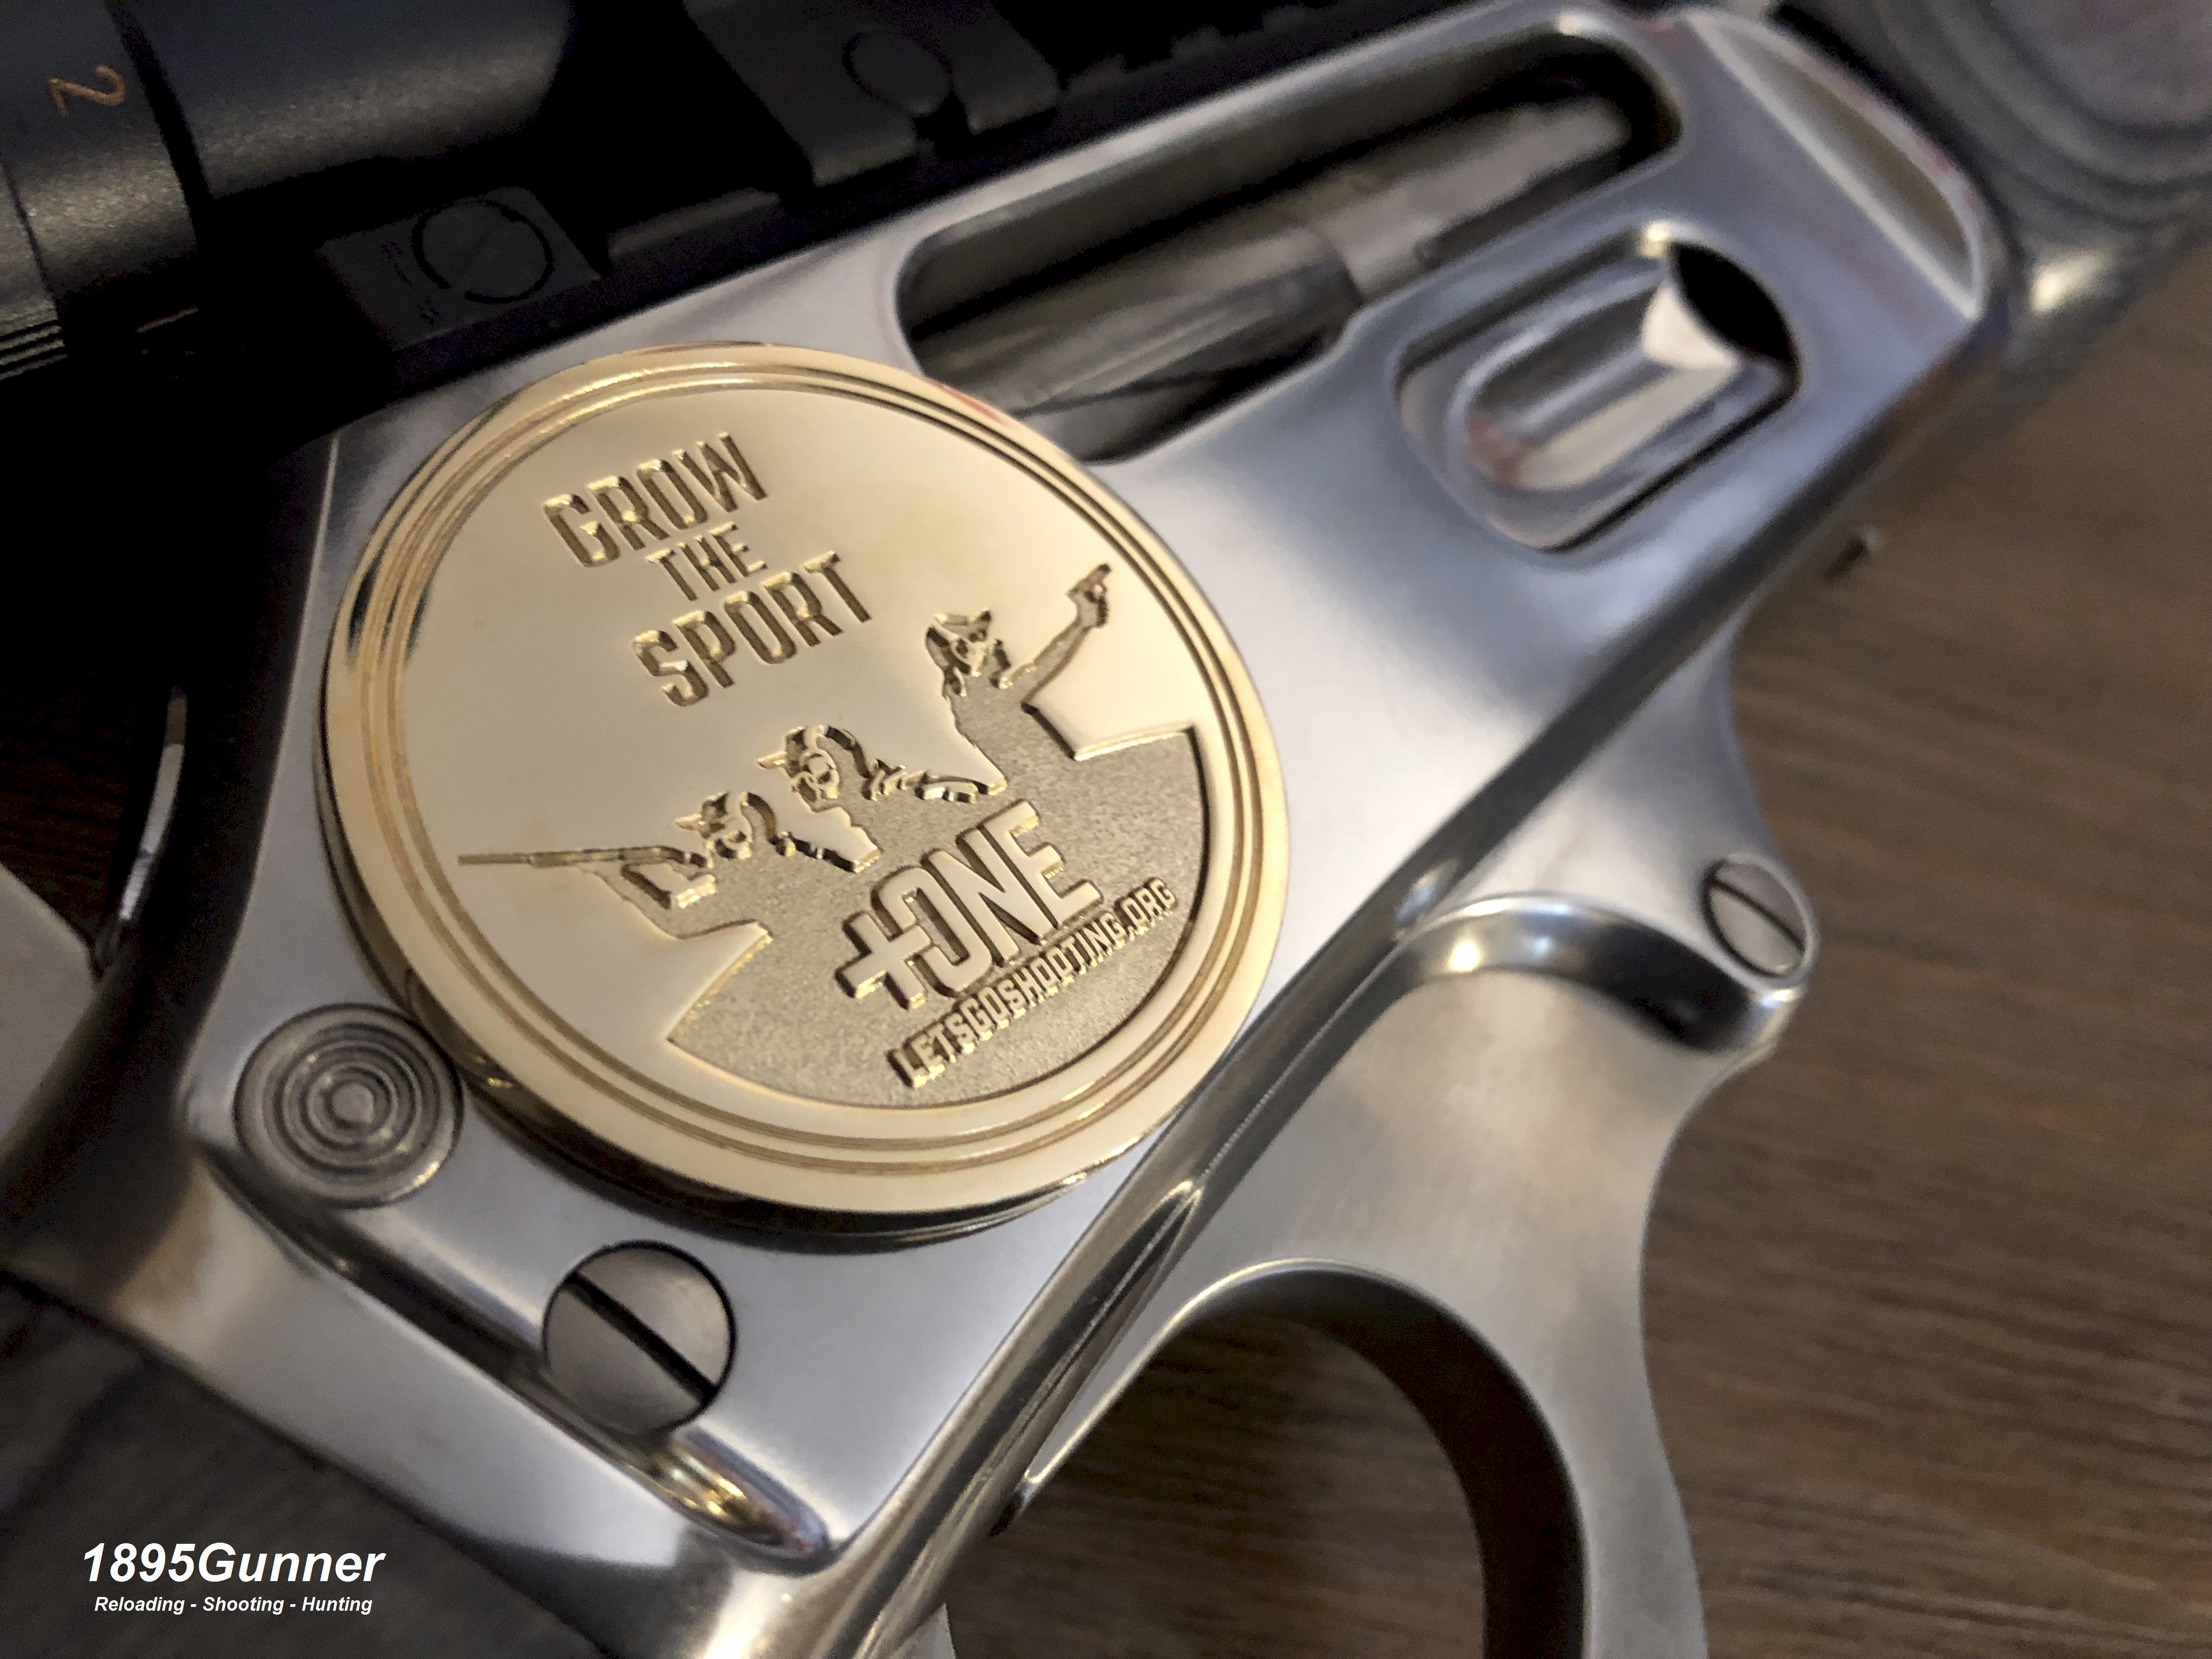 Ruger built Marlin 1895 SBL & an NSSF Challenge Coin